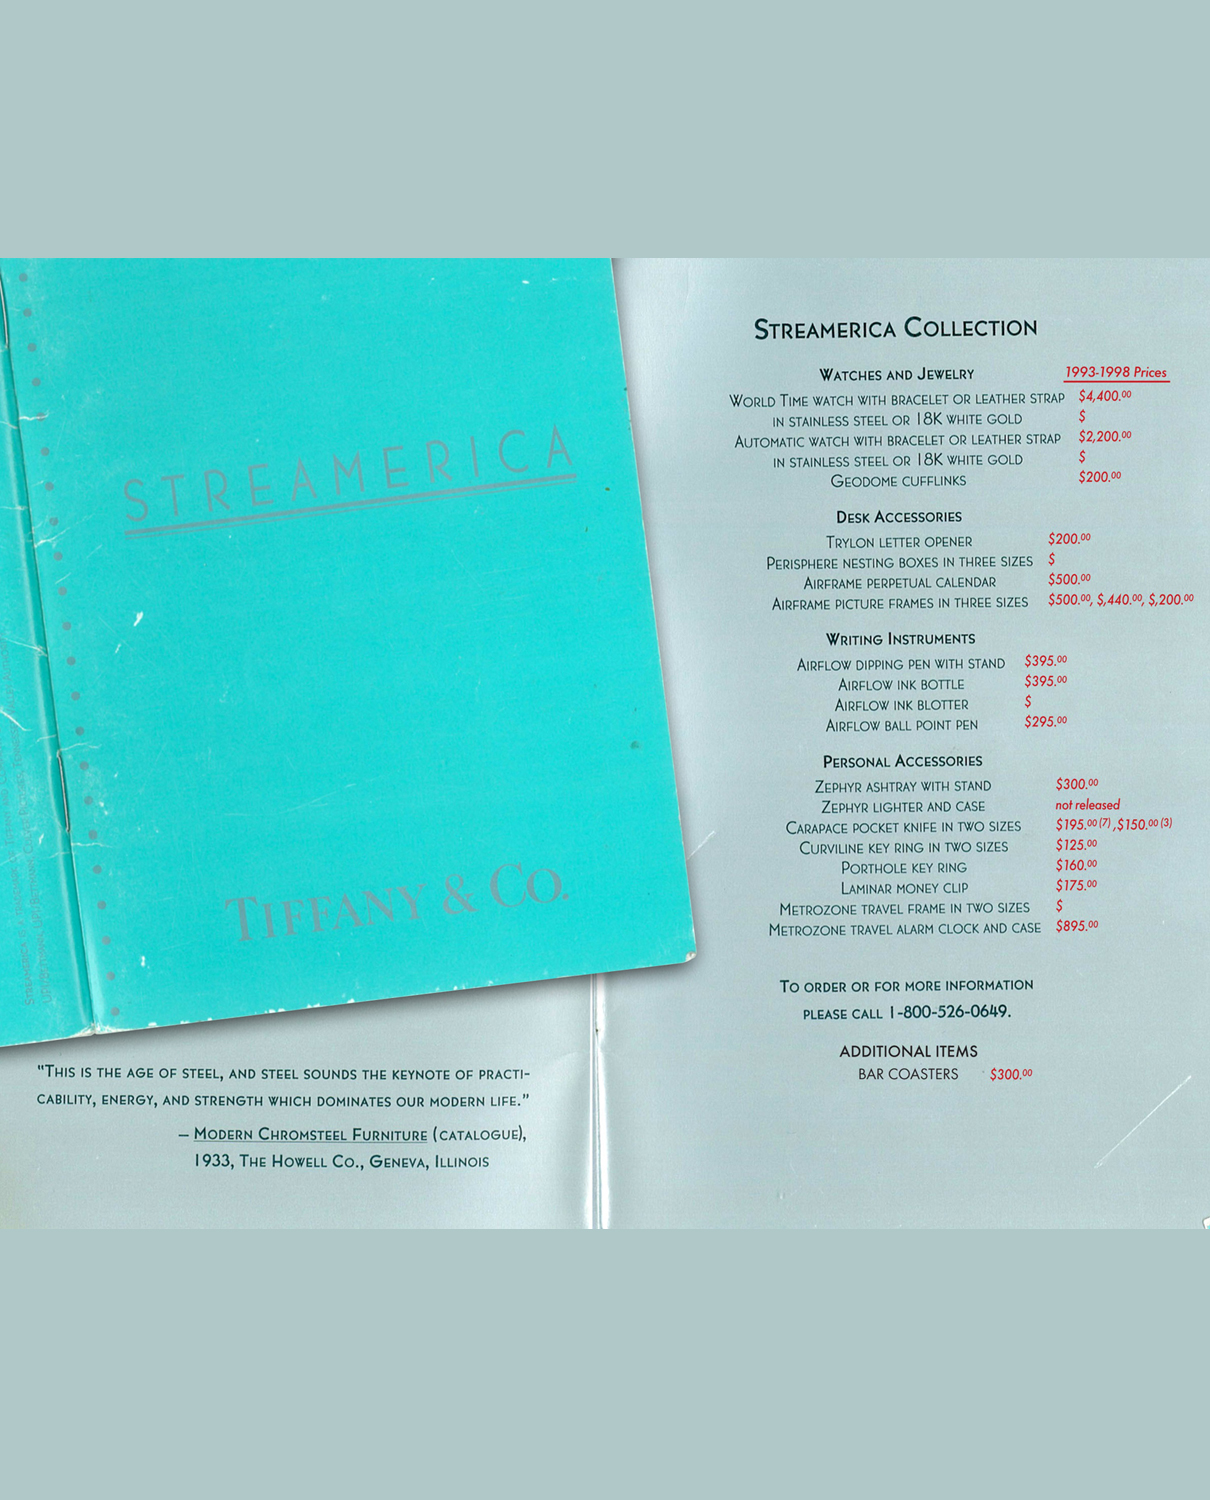 The backpage of the 1993 Streamerica Catalog listing the complete line of Accesories  by Tiffany & Co.  retail prices List